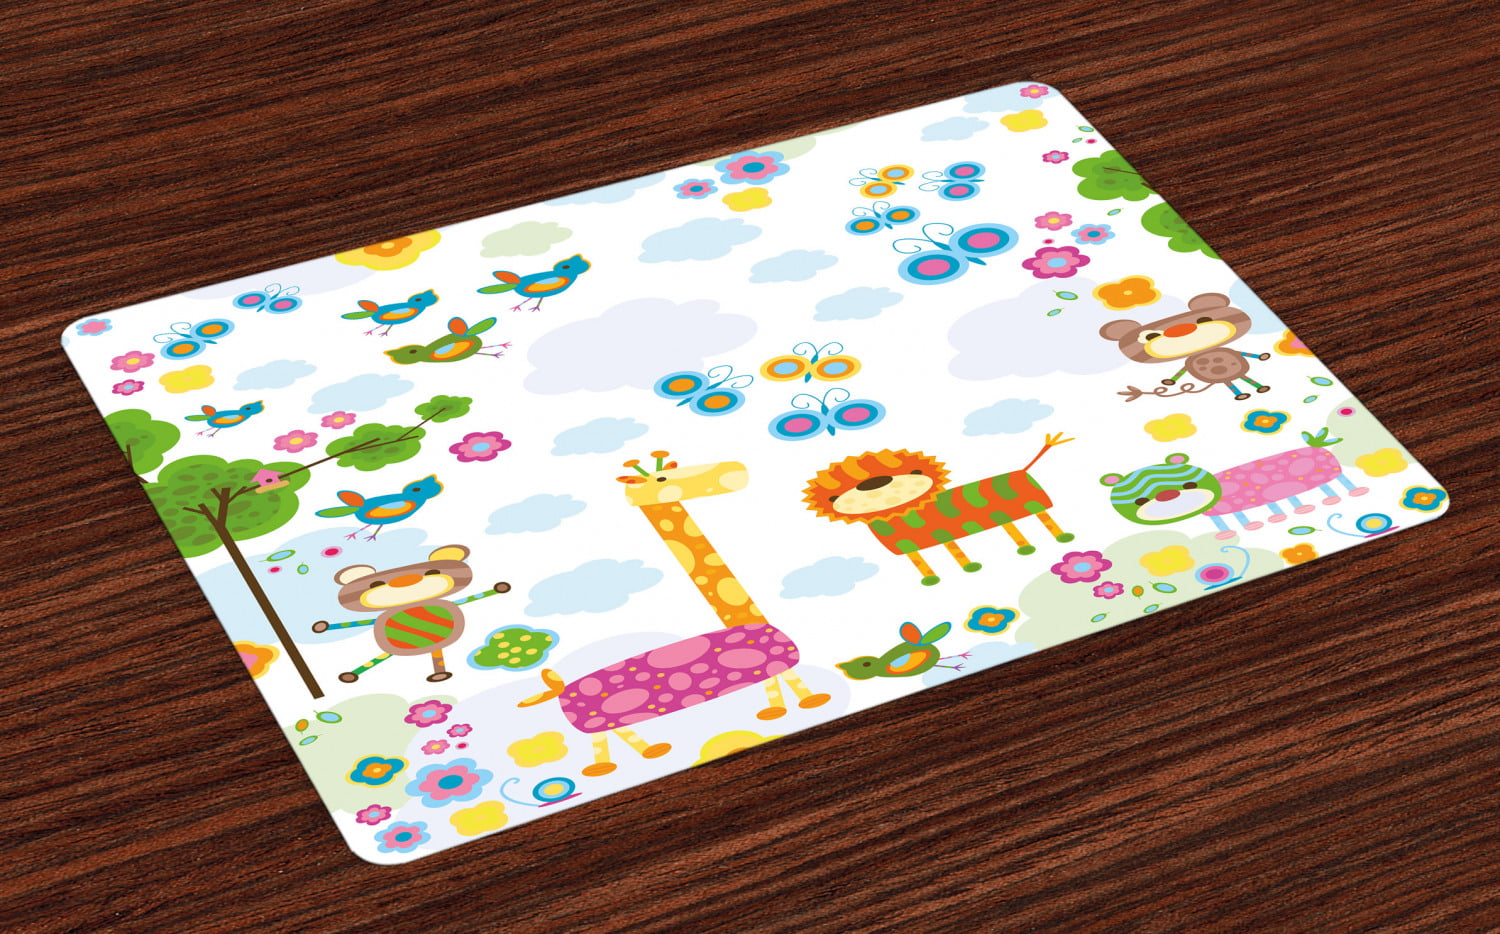 Ambesonne Nursery Place Mats Set of 4 Washable Fabric Placemats for Dining Room Kitchen Table Decor Multicolor Floral Background with Funny and Animals Giraffe Lion Monkeys and Butterflies